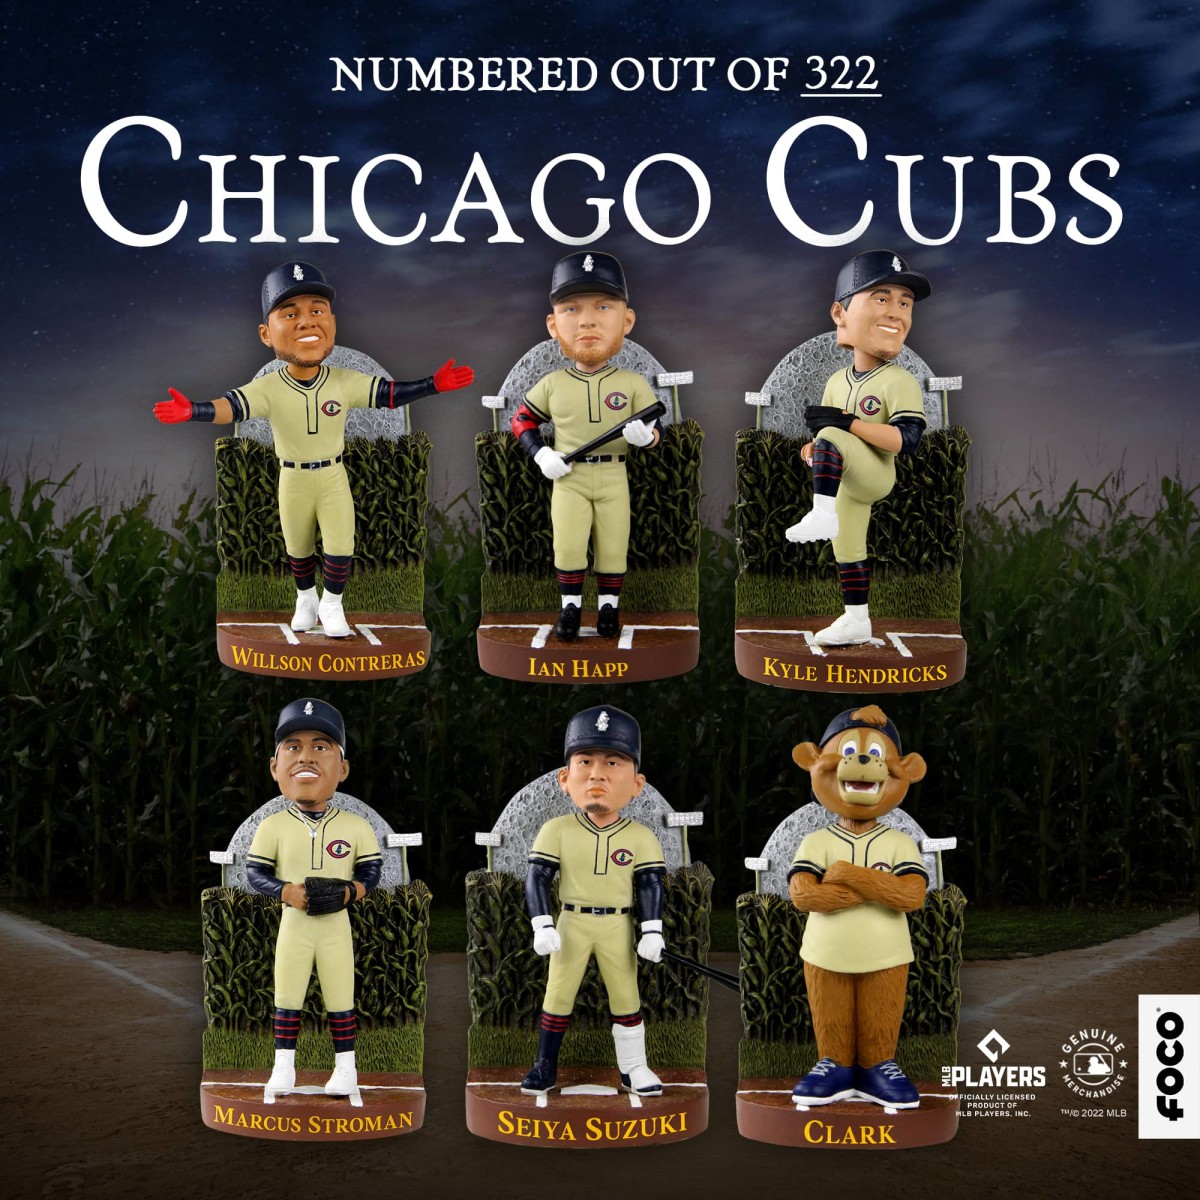 FOCO USA Releases Exclusive Chicago Cubs 'Field of Dreams' Bobbleheads